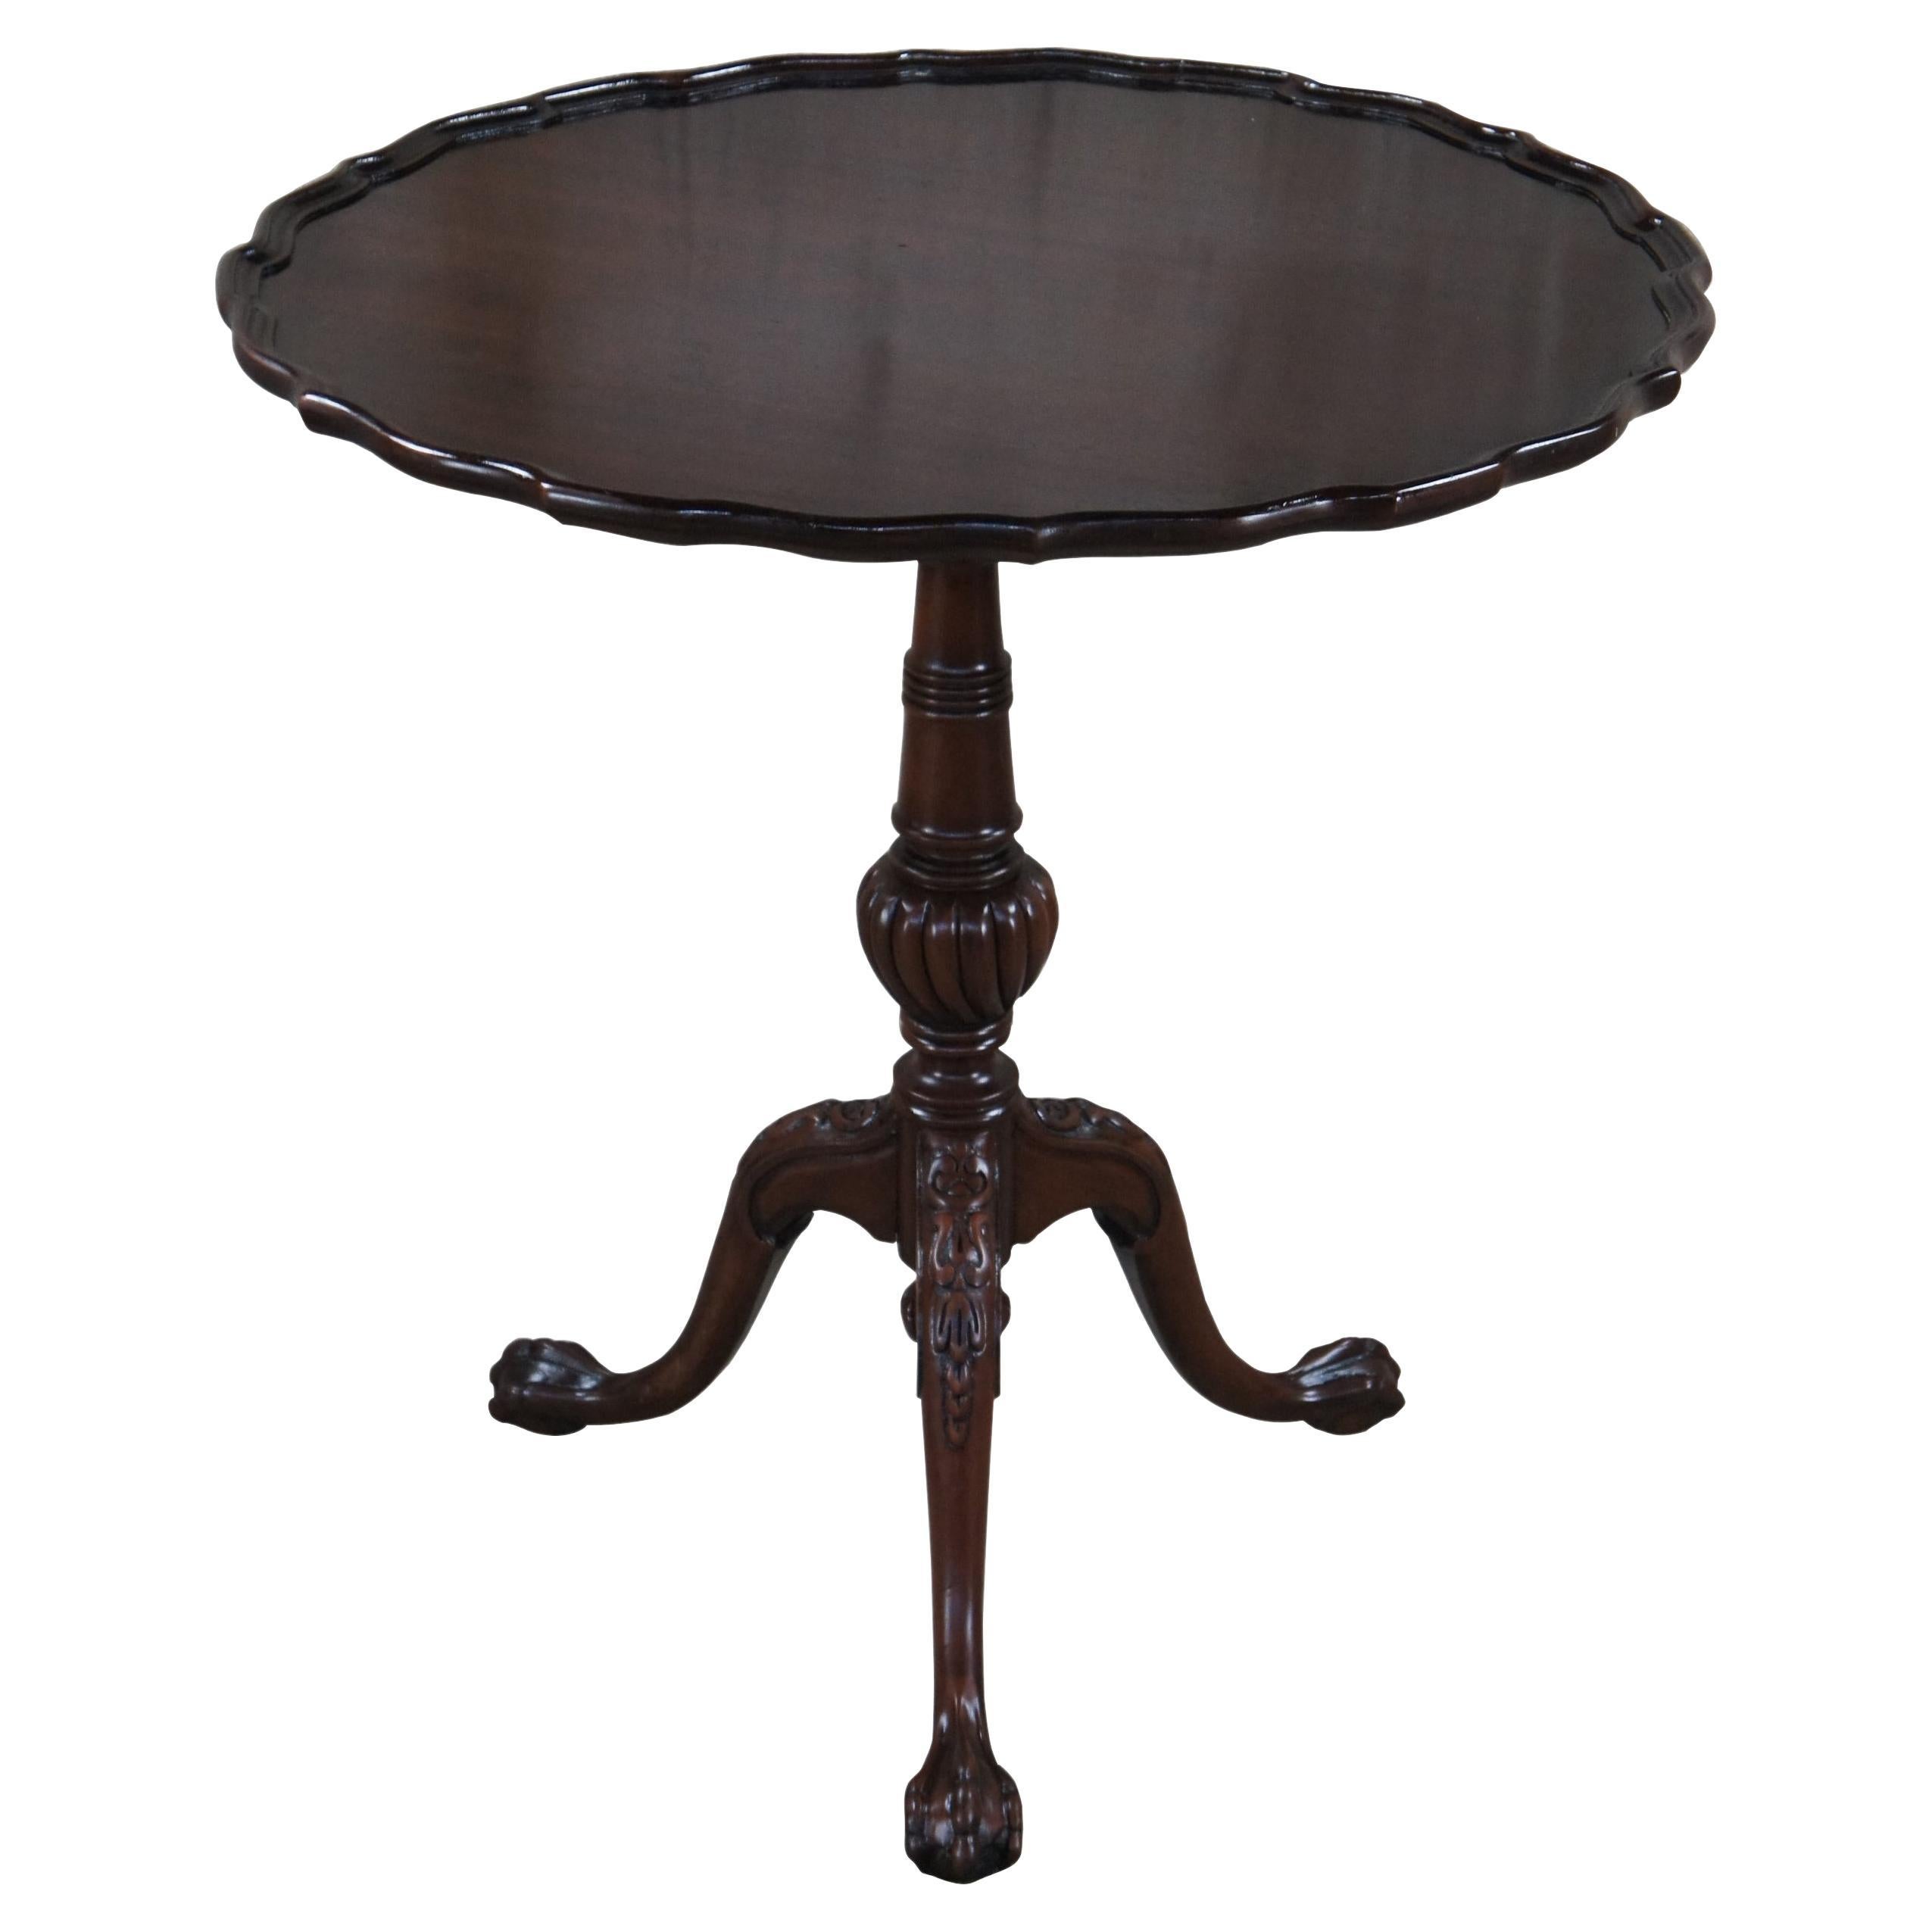 An antique English Chippendale style pie crust table, circa 1900s.  Made from mahogany with a beautifully scalloped top over a turned and graduated center column, ribbed over a fluted and twisted bulb.  The table is supported by three downswept legs